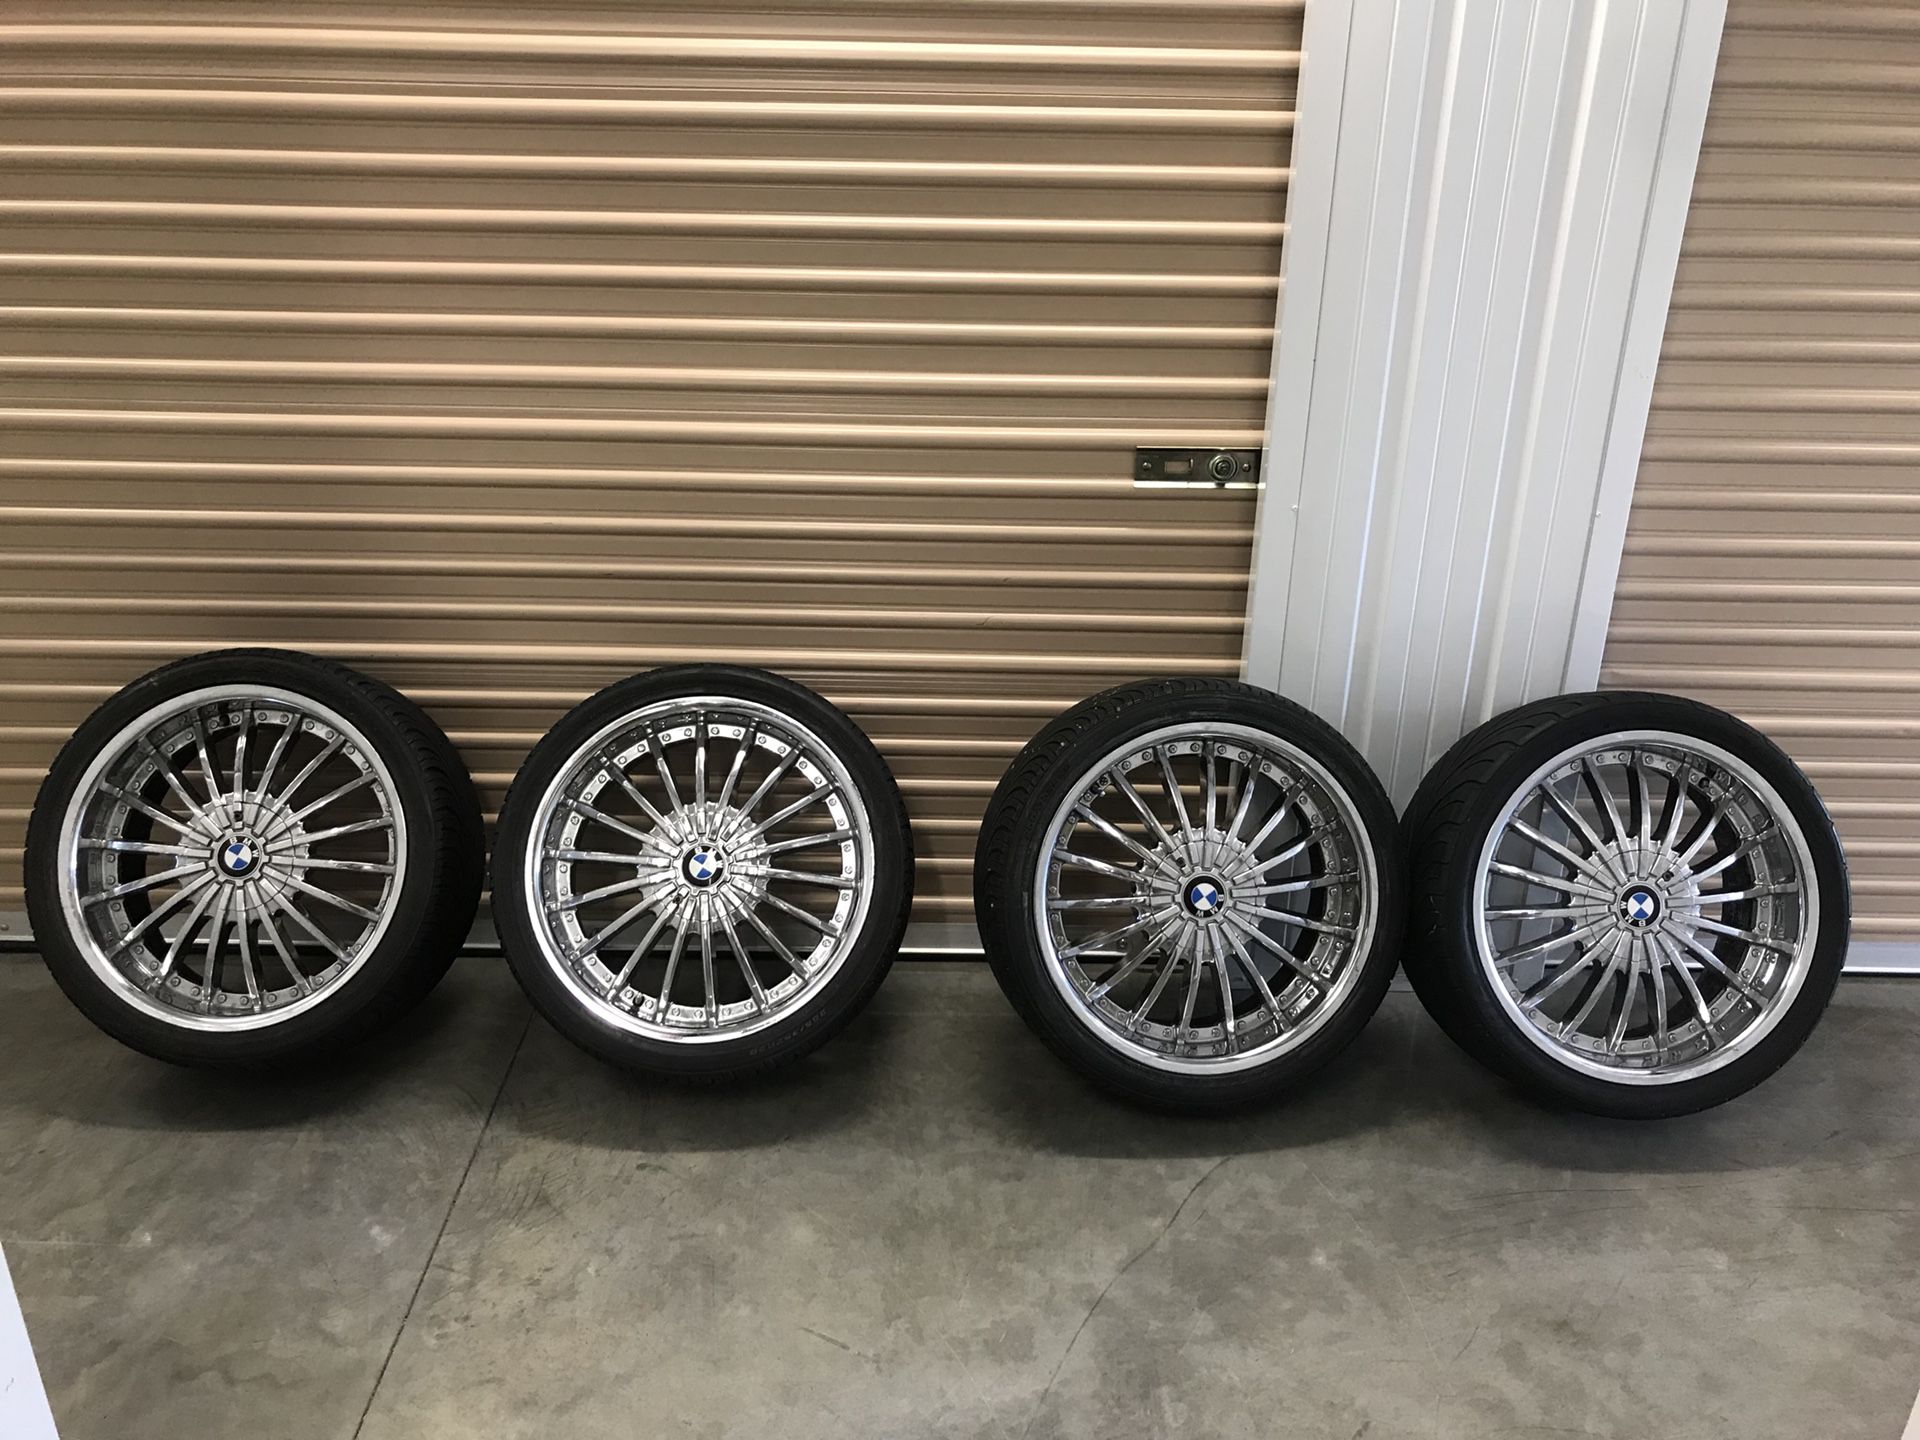 20” Chrome Wheels and Tires. BMW, Benz, Imports